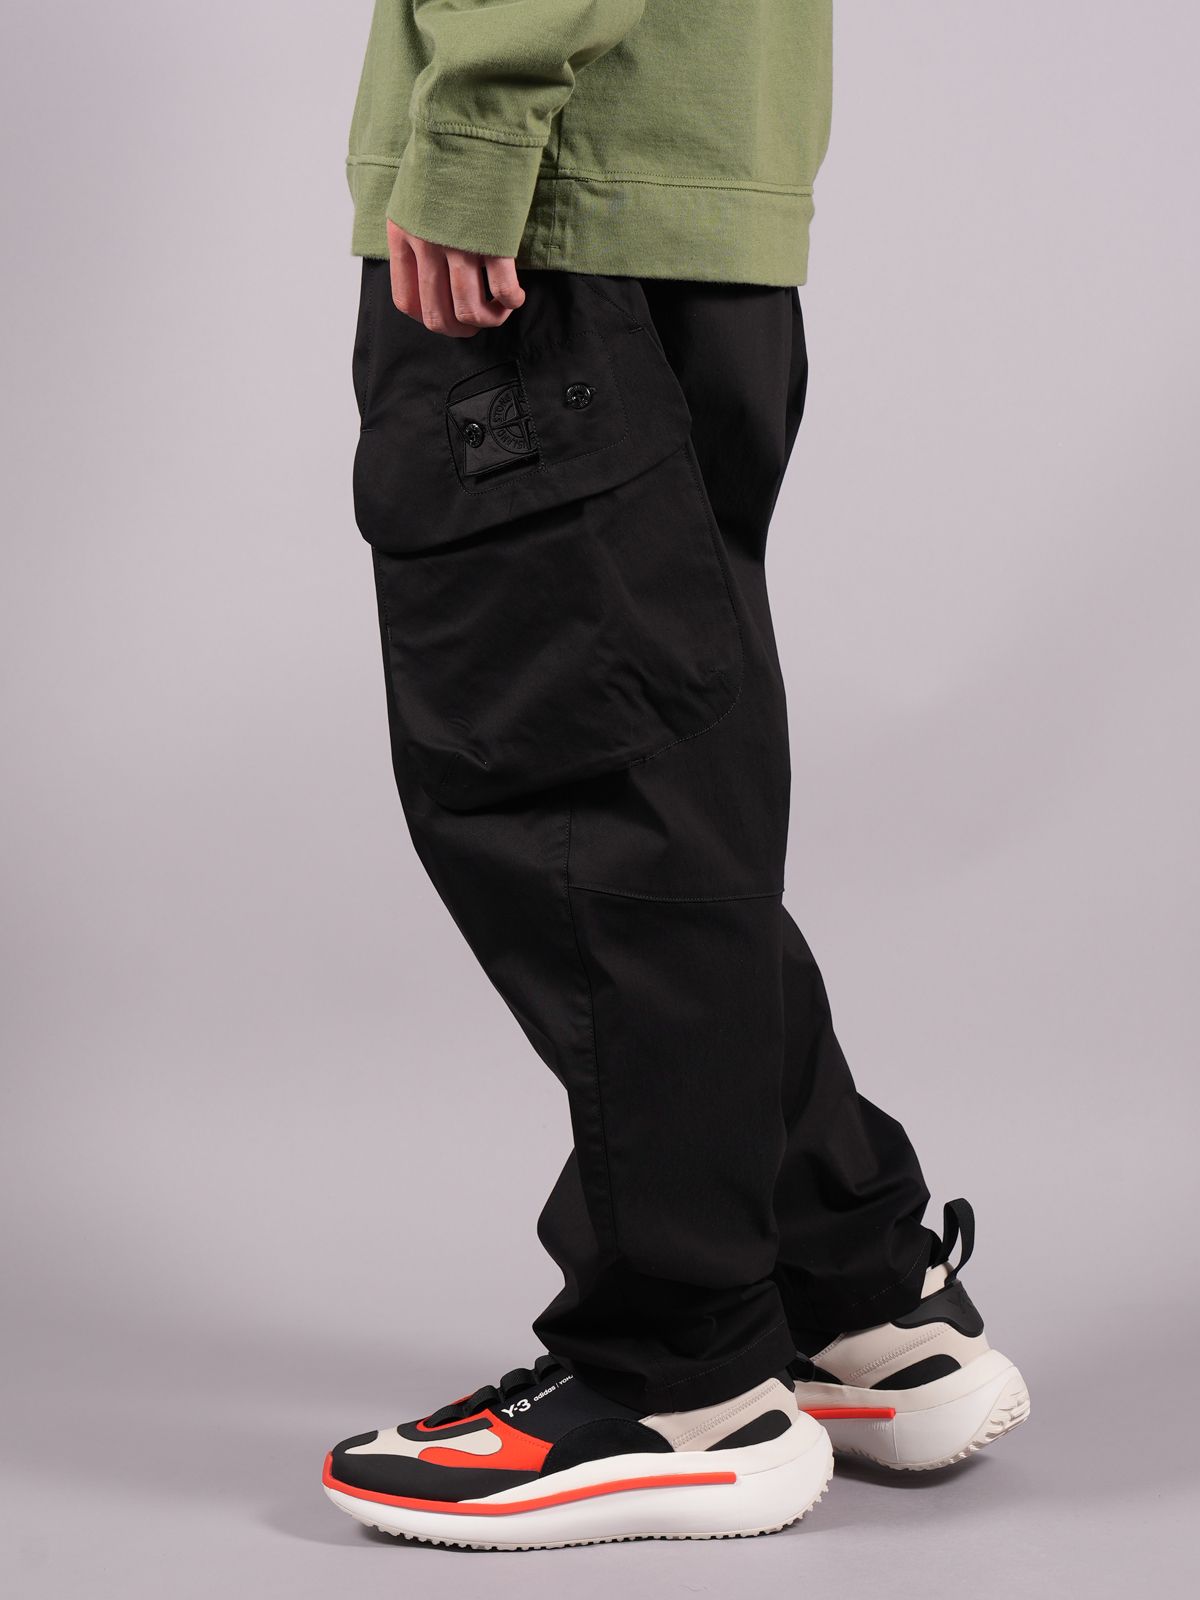 STONE ISLAND SHADOW PROJECT - 30417 CARGO PANTS_CHAPTER 1 / カーゴ 